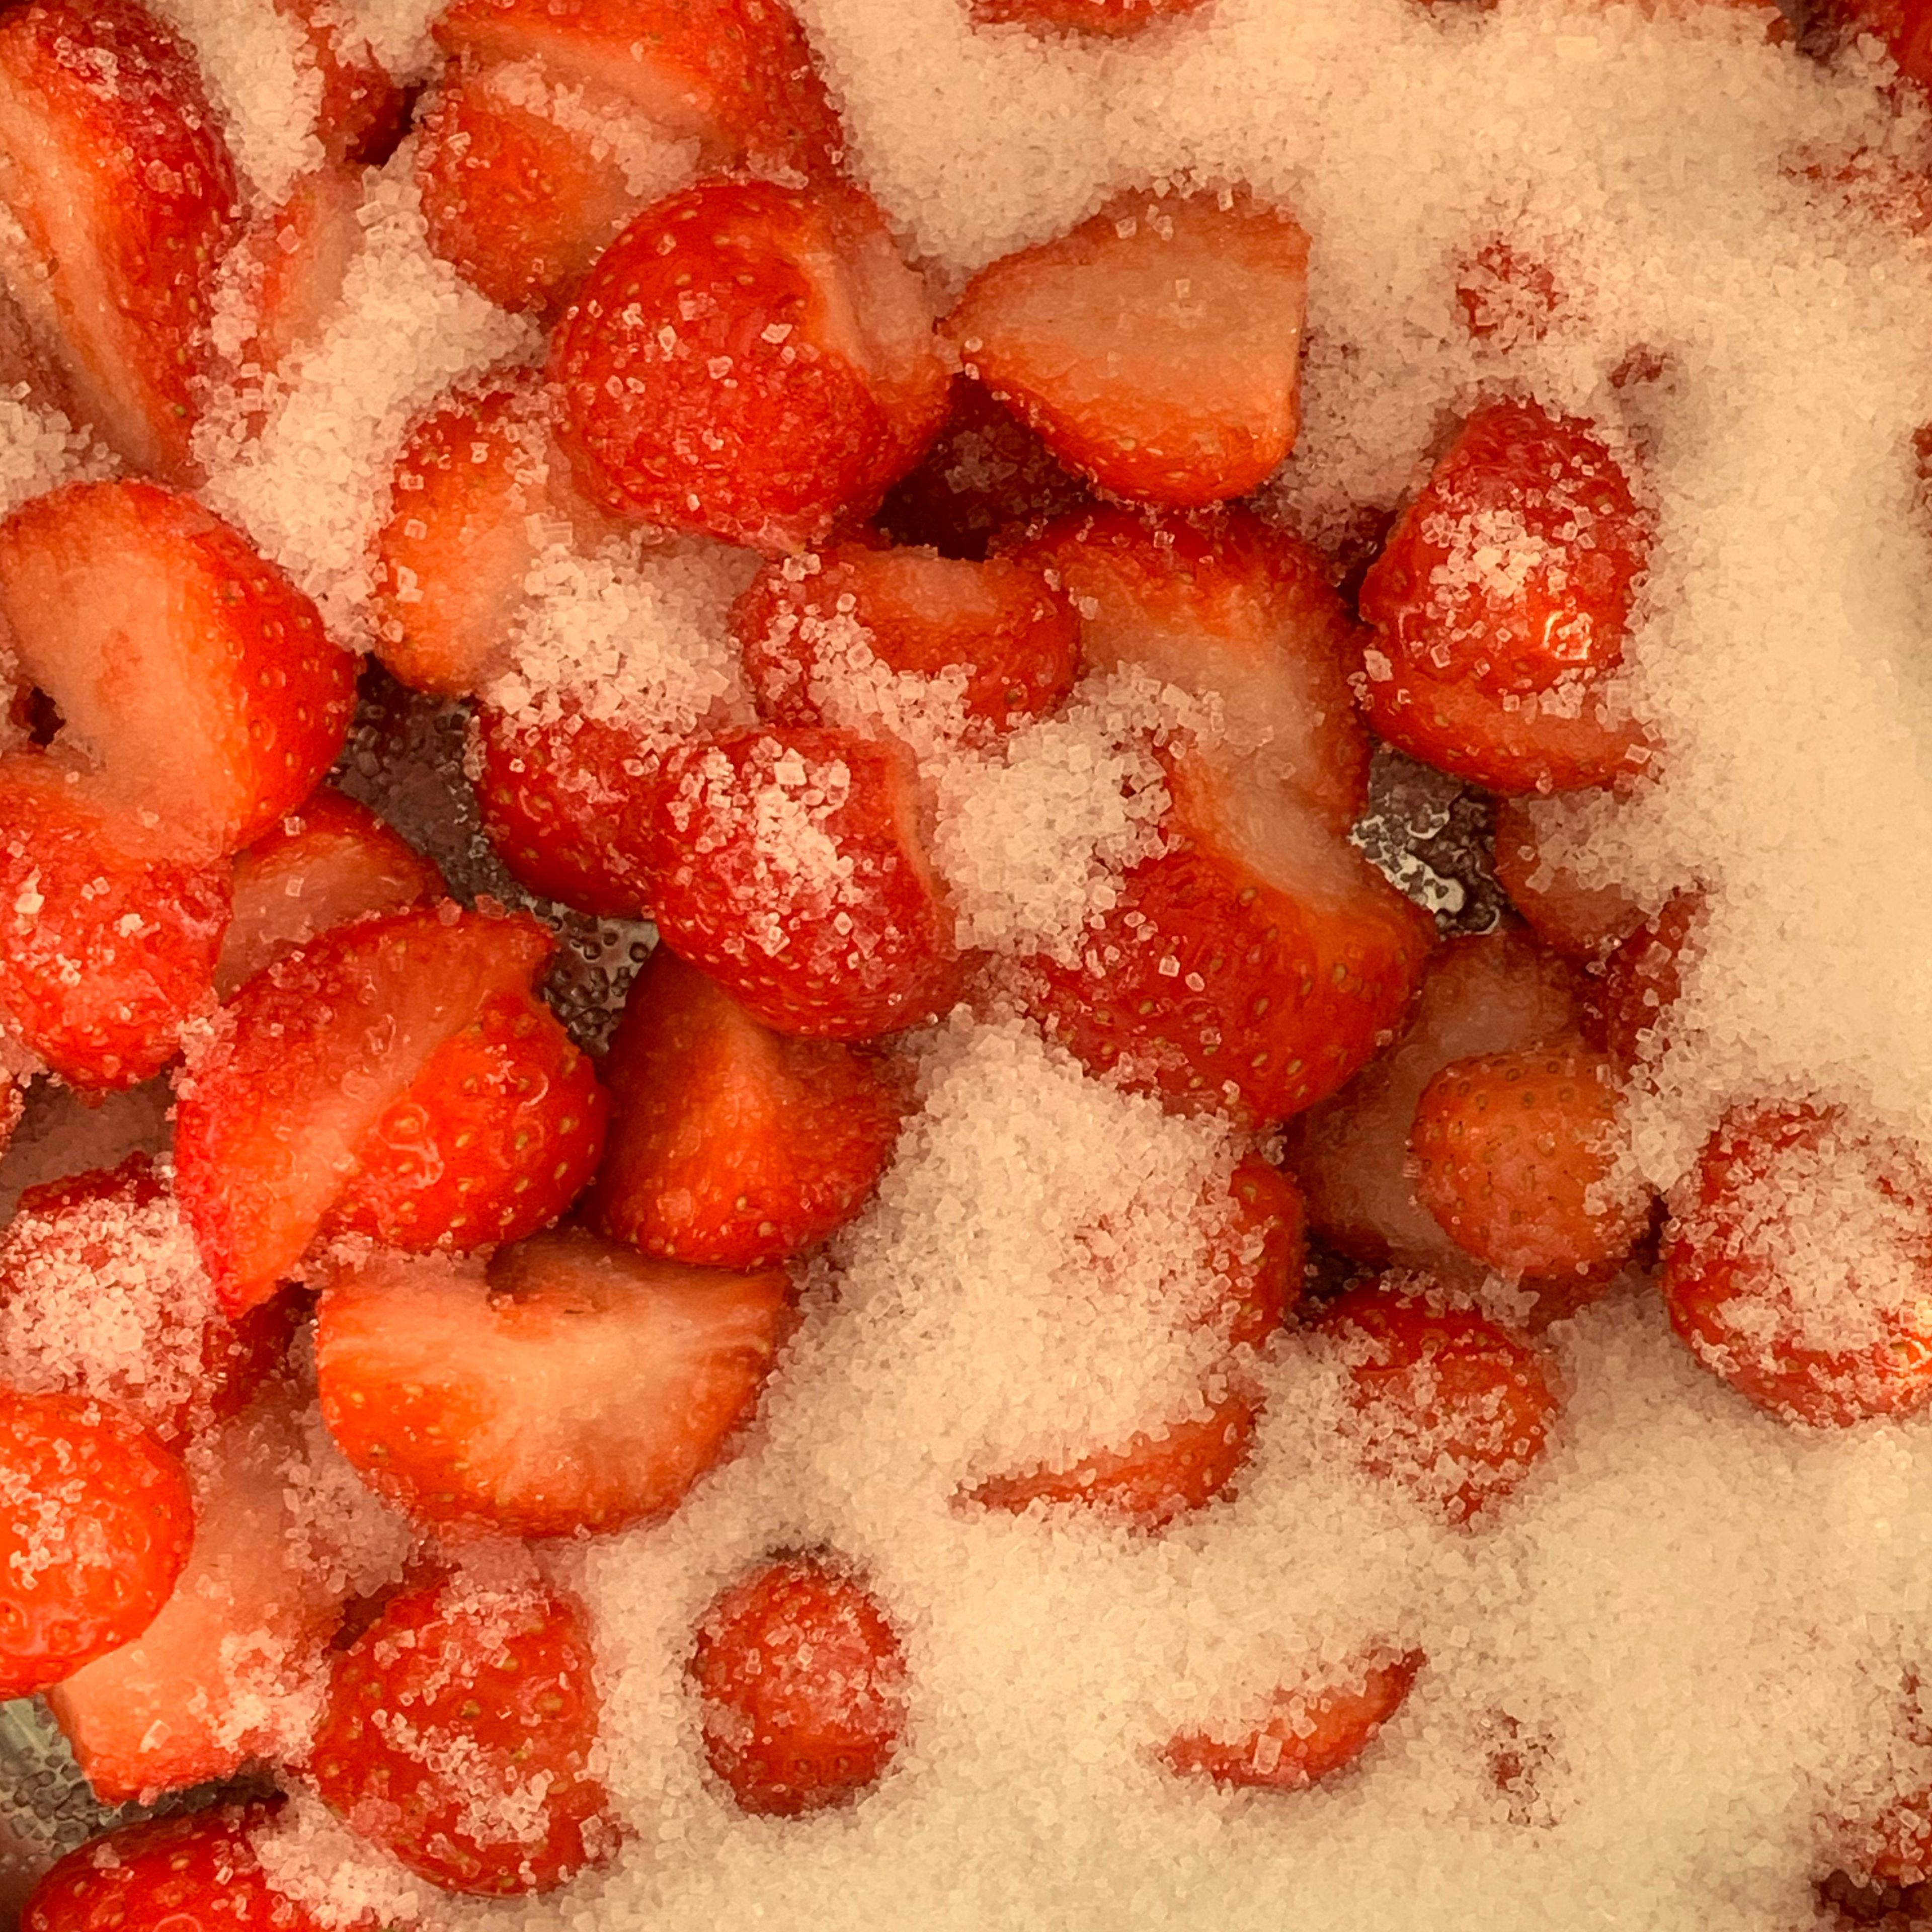 Clean and halve the strawberries. Add sugar.